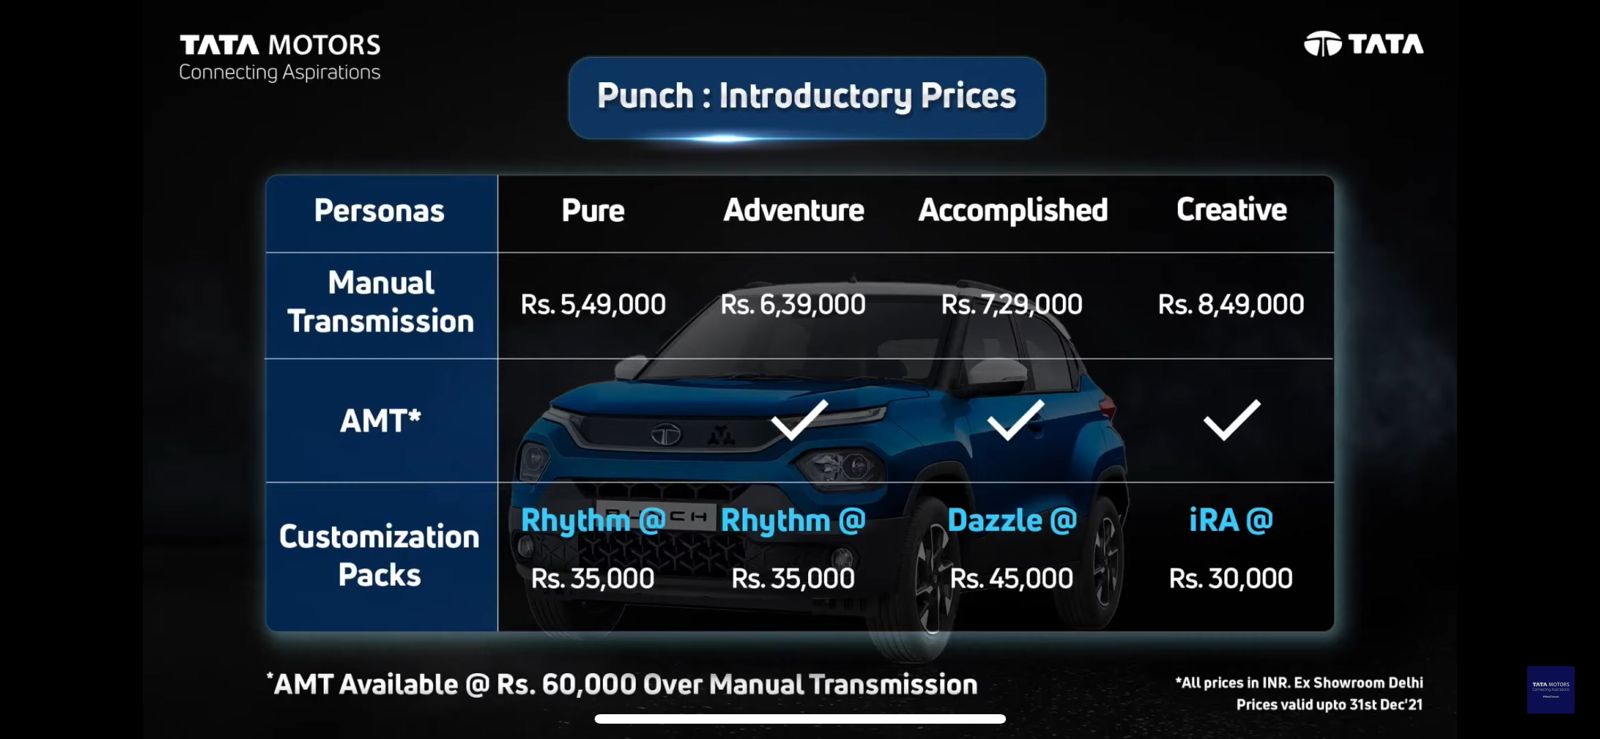 <p>Introductory pricing starts at Rs 5.49 lakh, going up to Rs 8.49 lakh, ex-showroom. AMT variants Rs 60,000 over applicable MT variants.</p>

